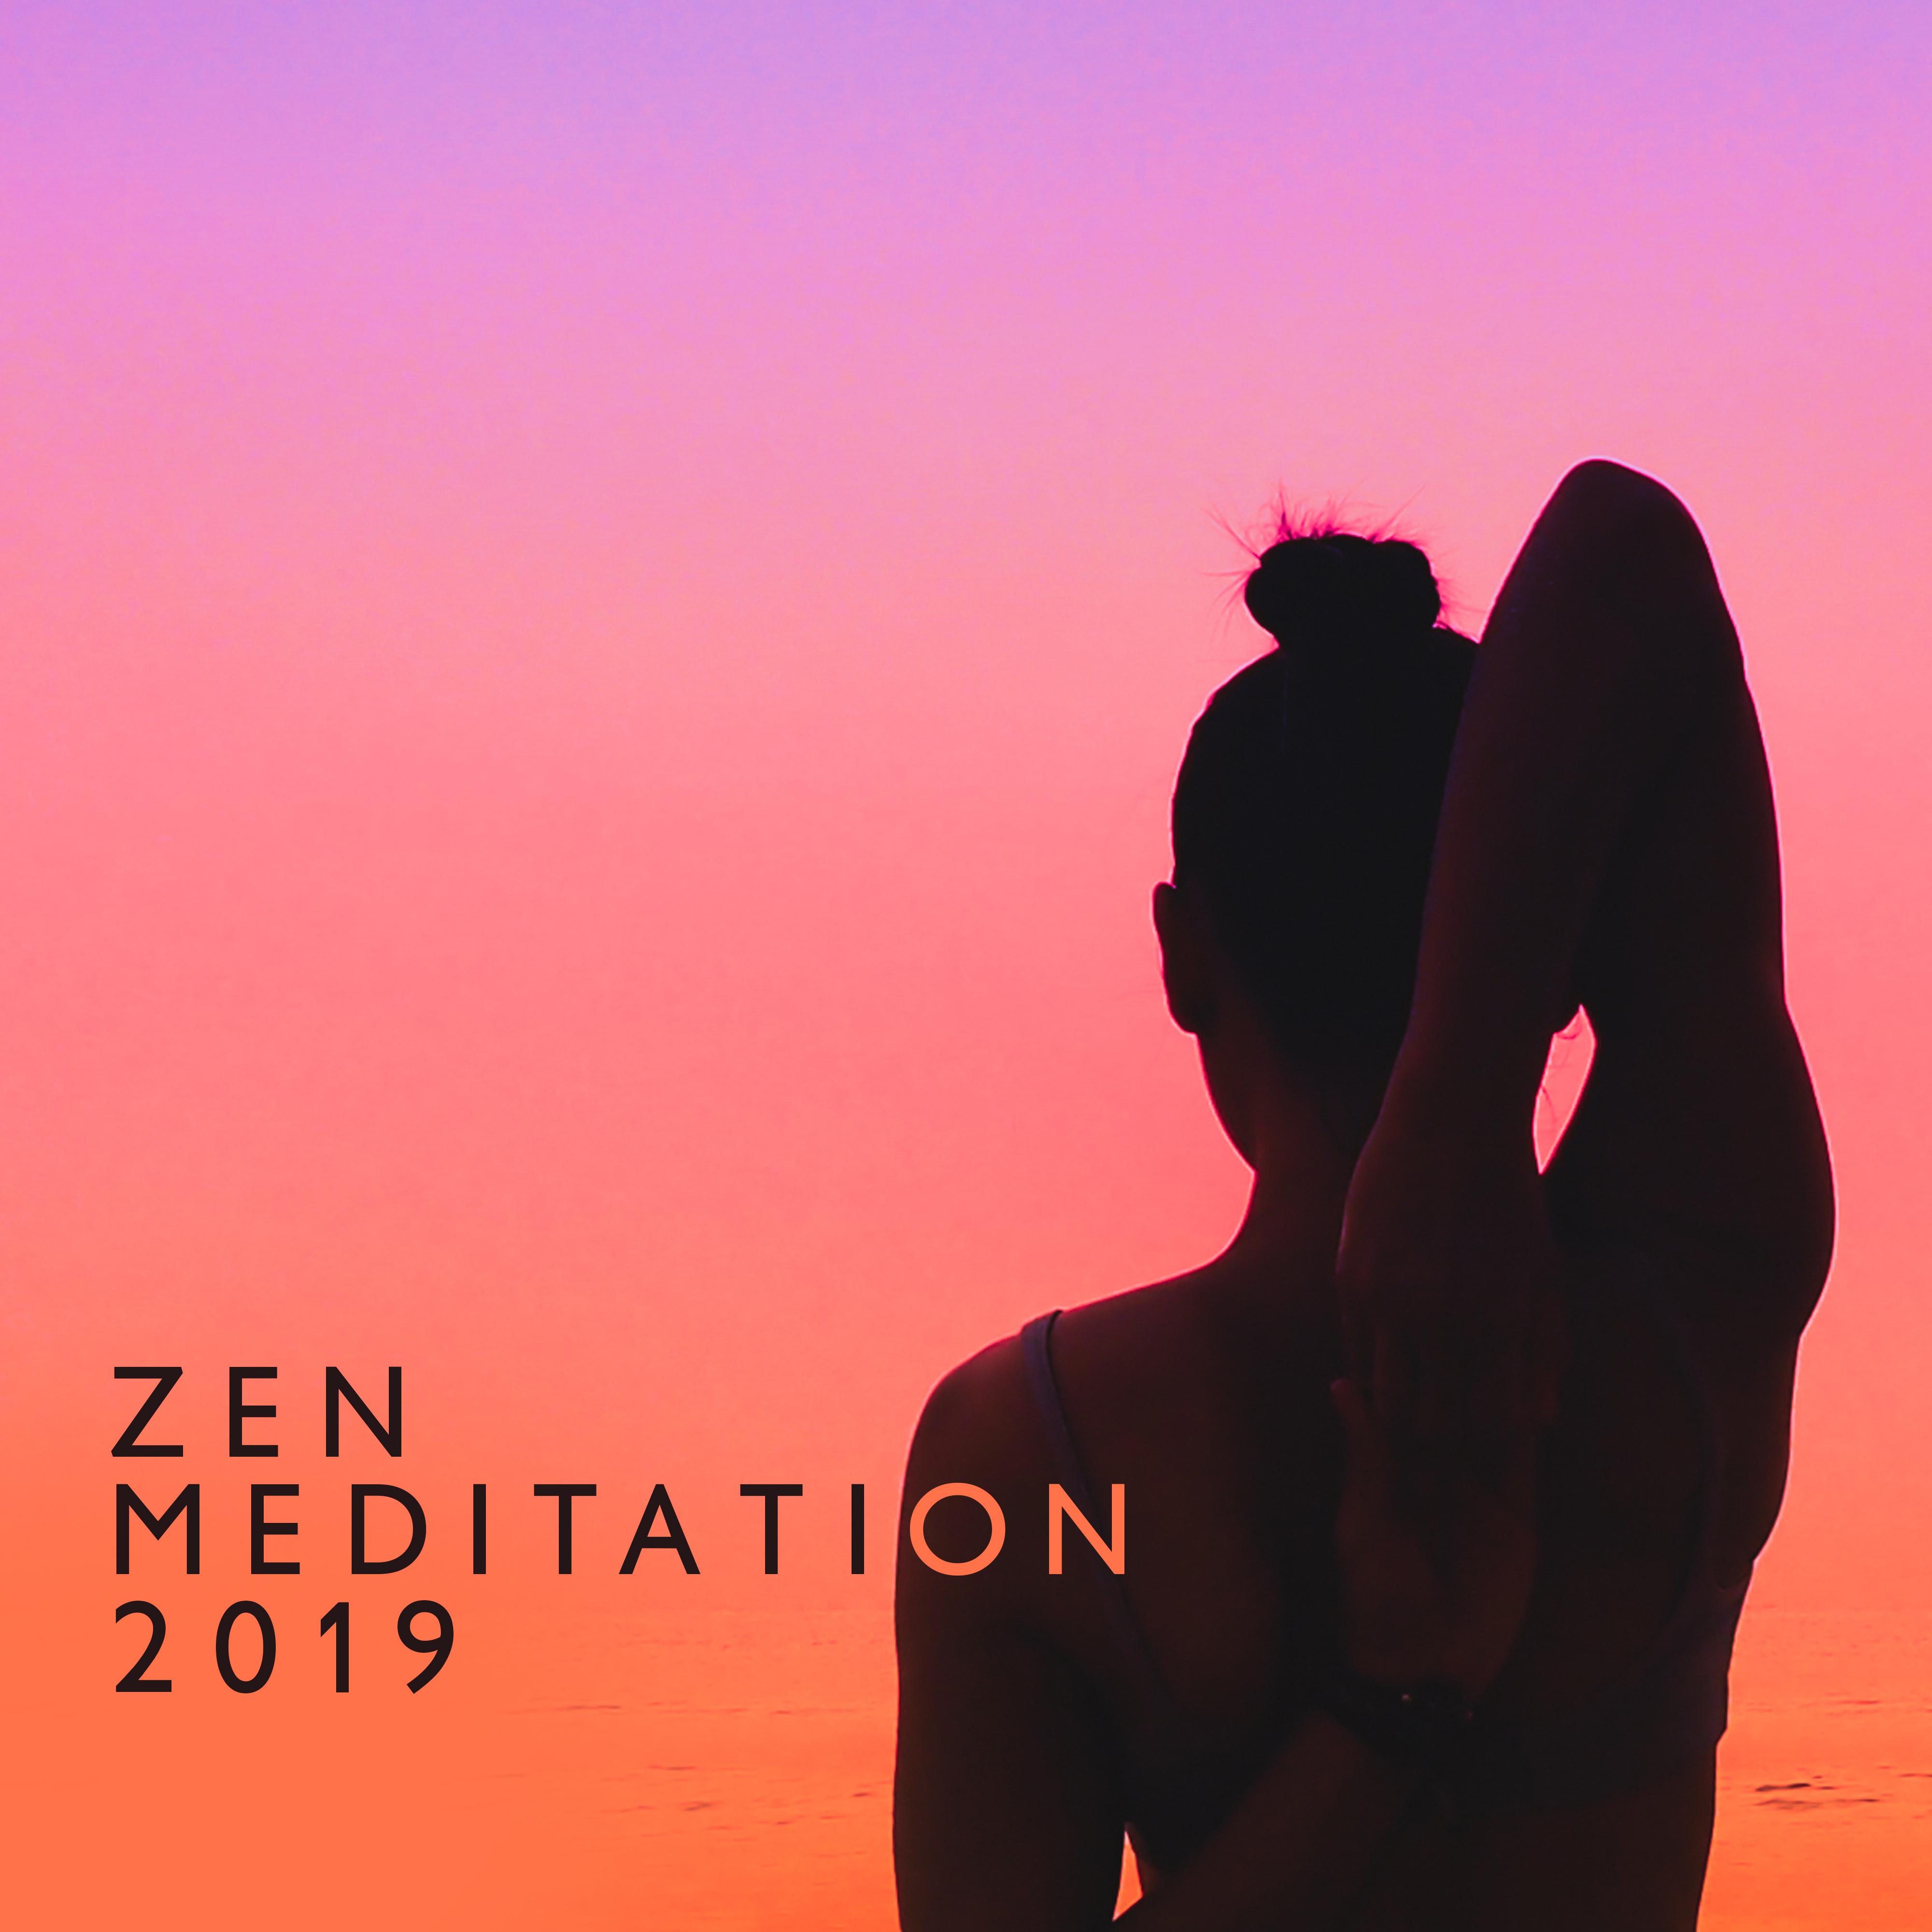 Zen Meditation 2019: 15 New Age Songs for Perfect Yoga Healing Therapy